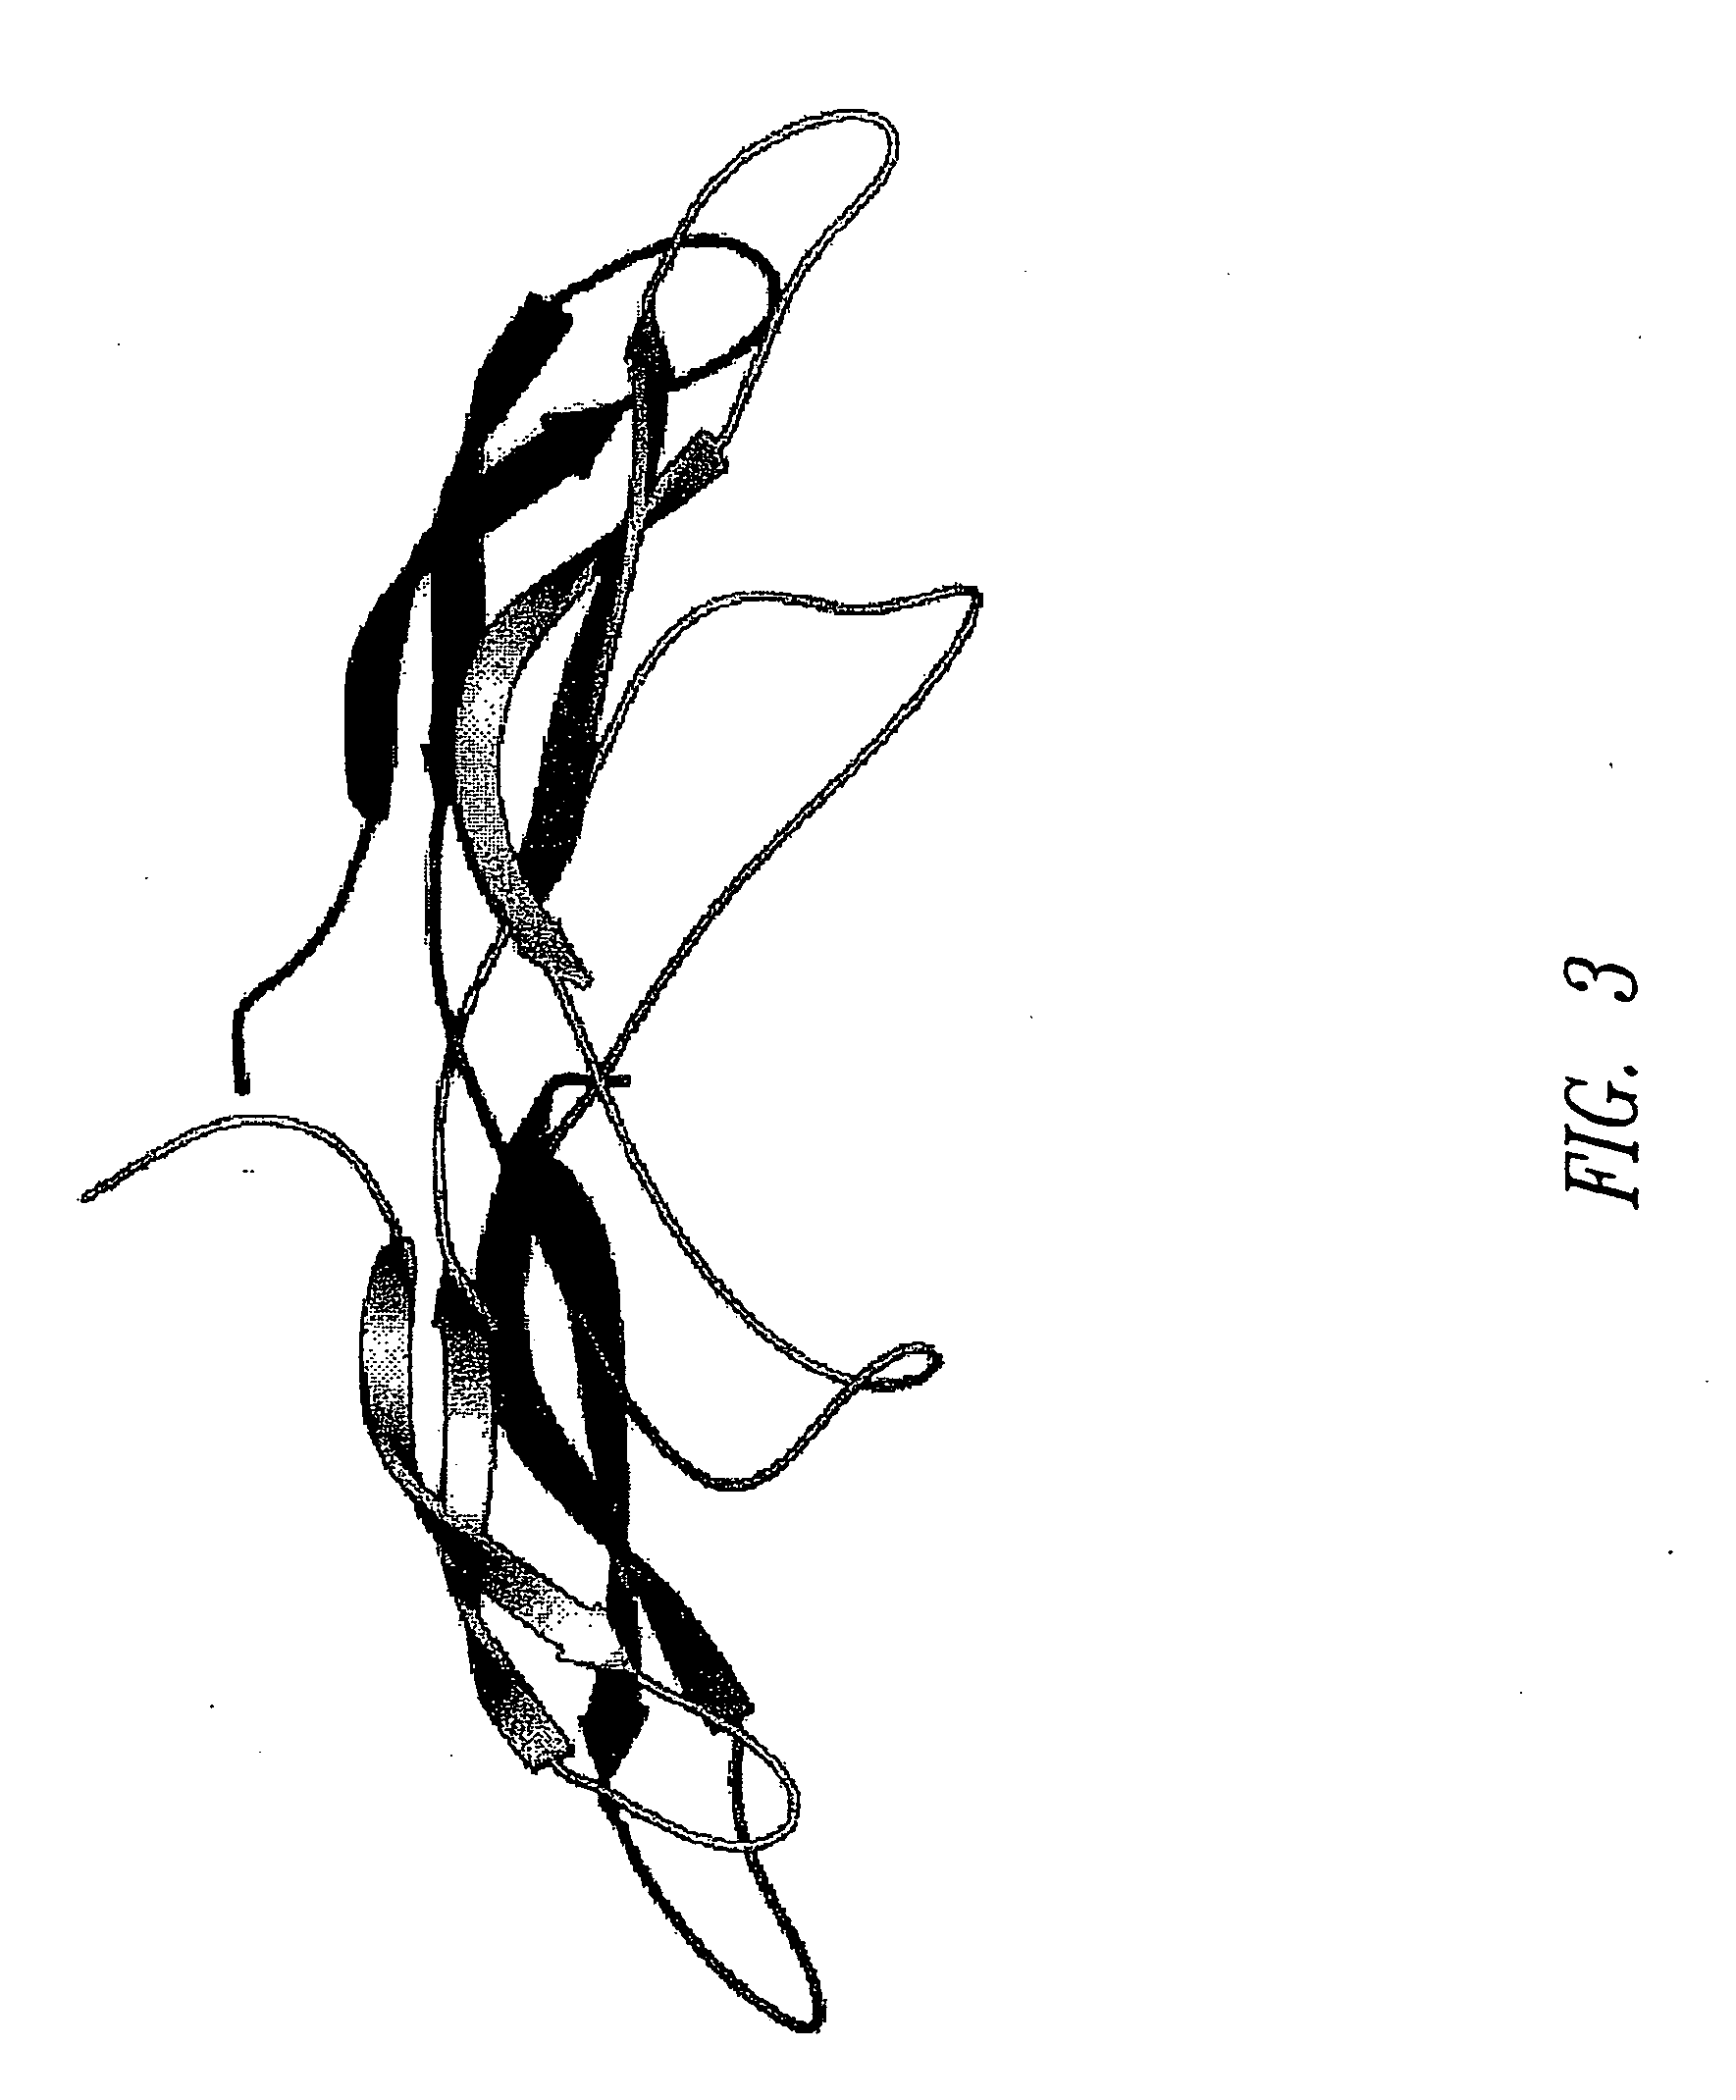 Antibodies specific for sclerostin and methods for increasing bone mineralization